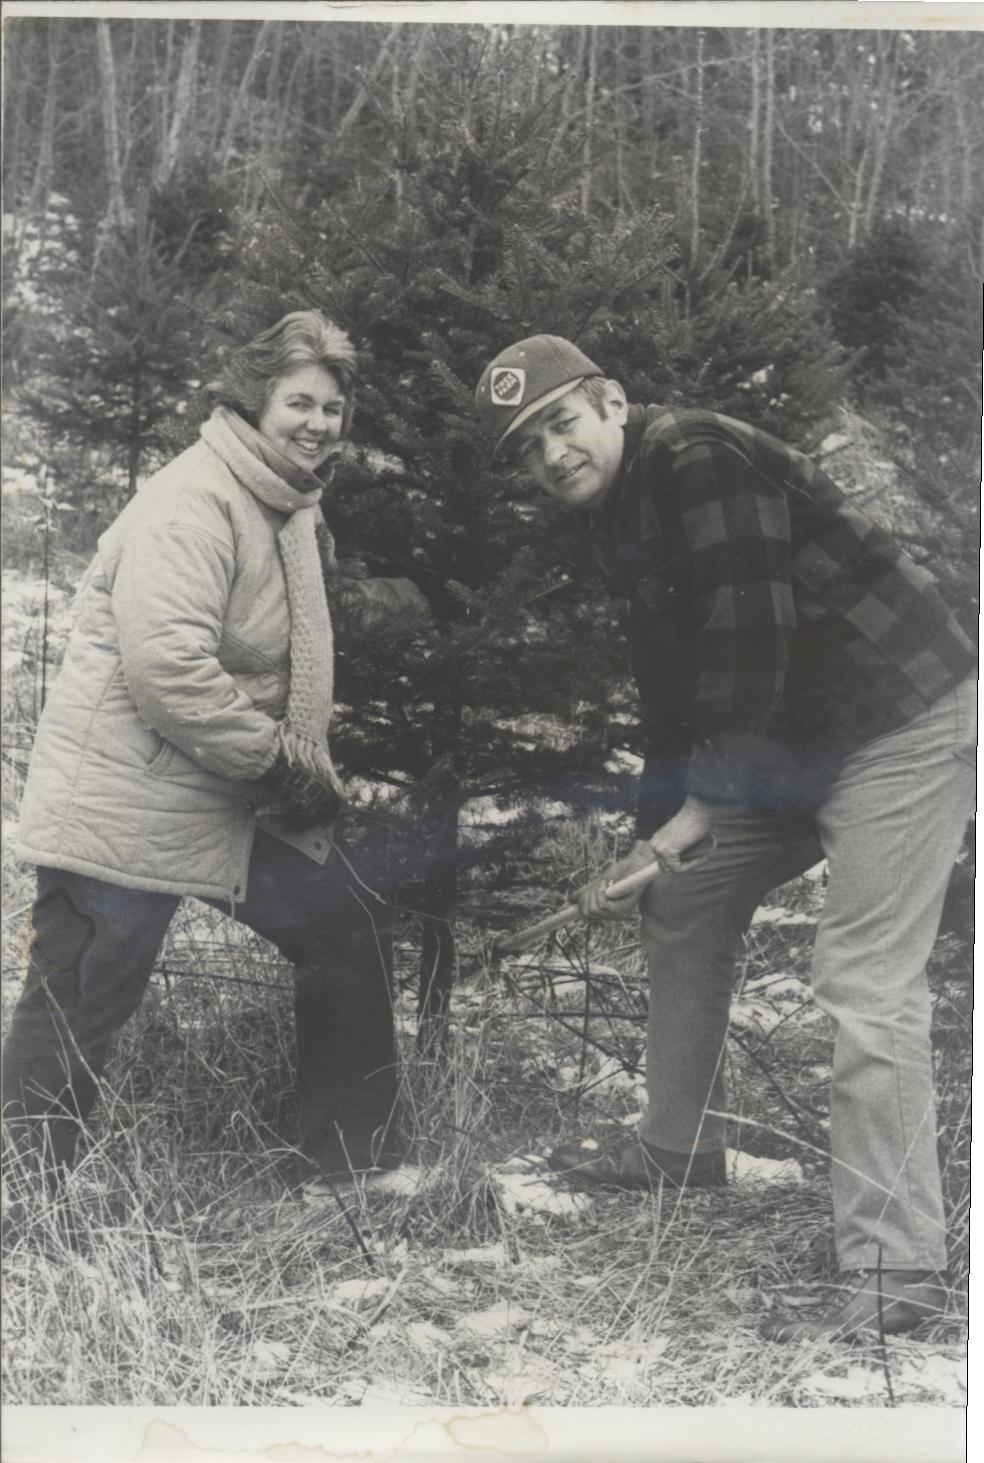 robert and prill cutting a Christmas tree